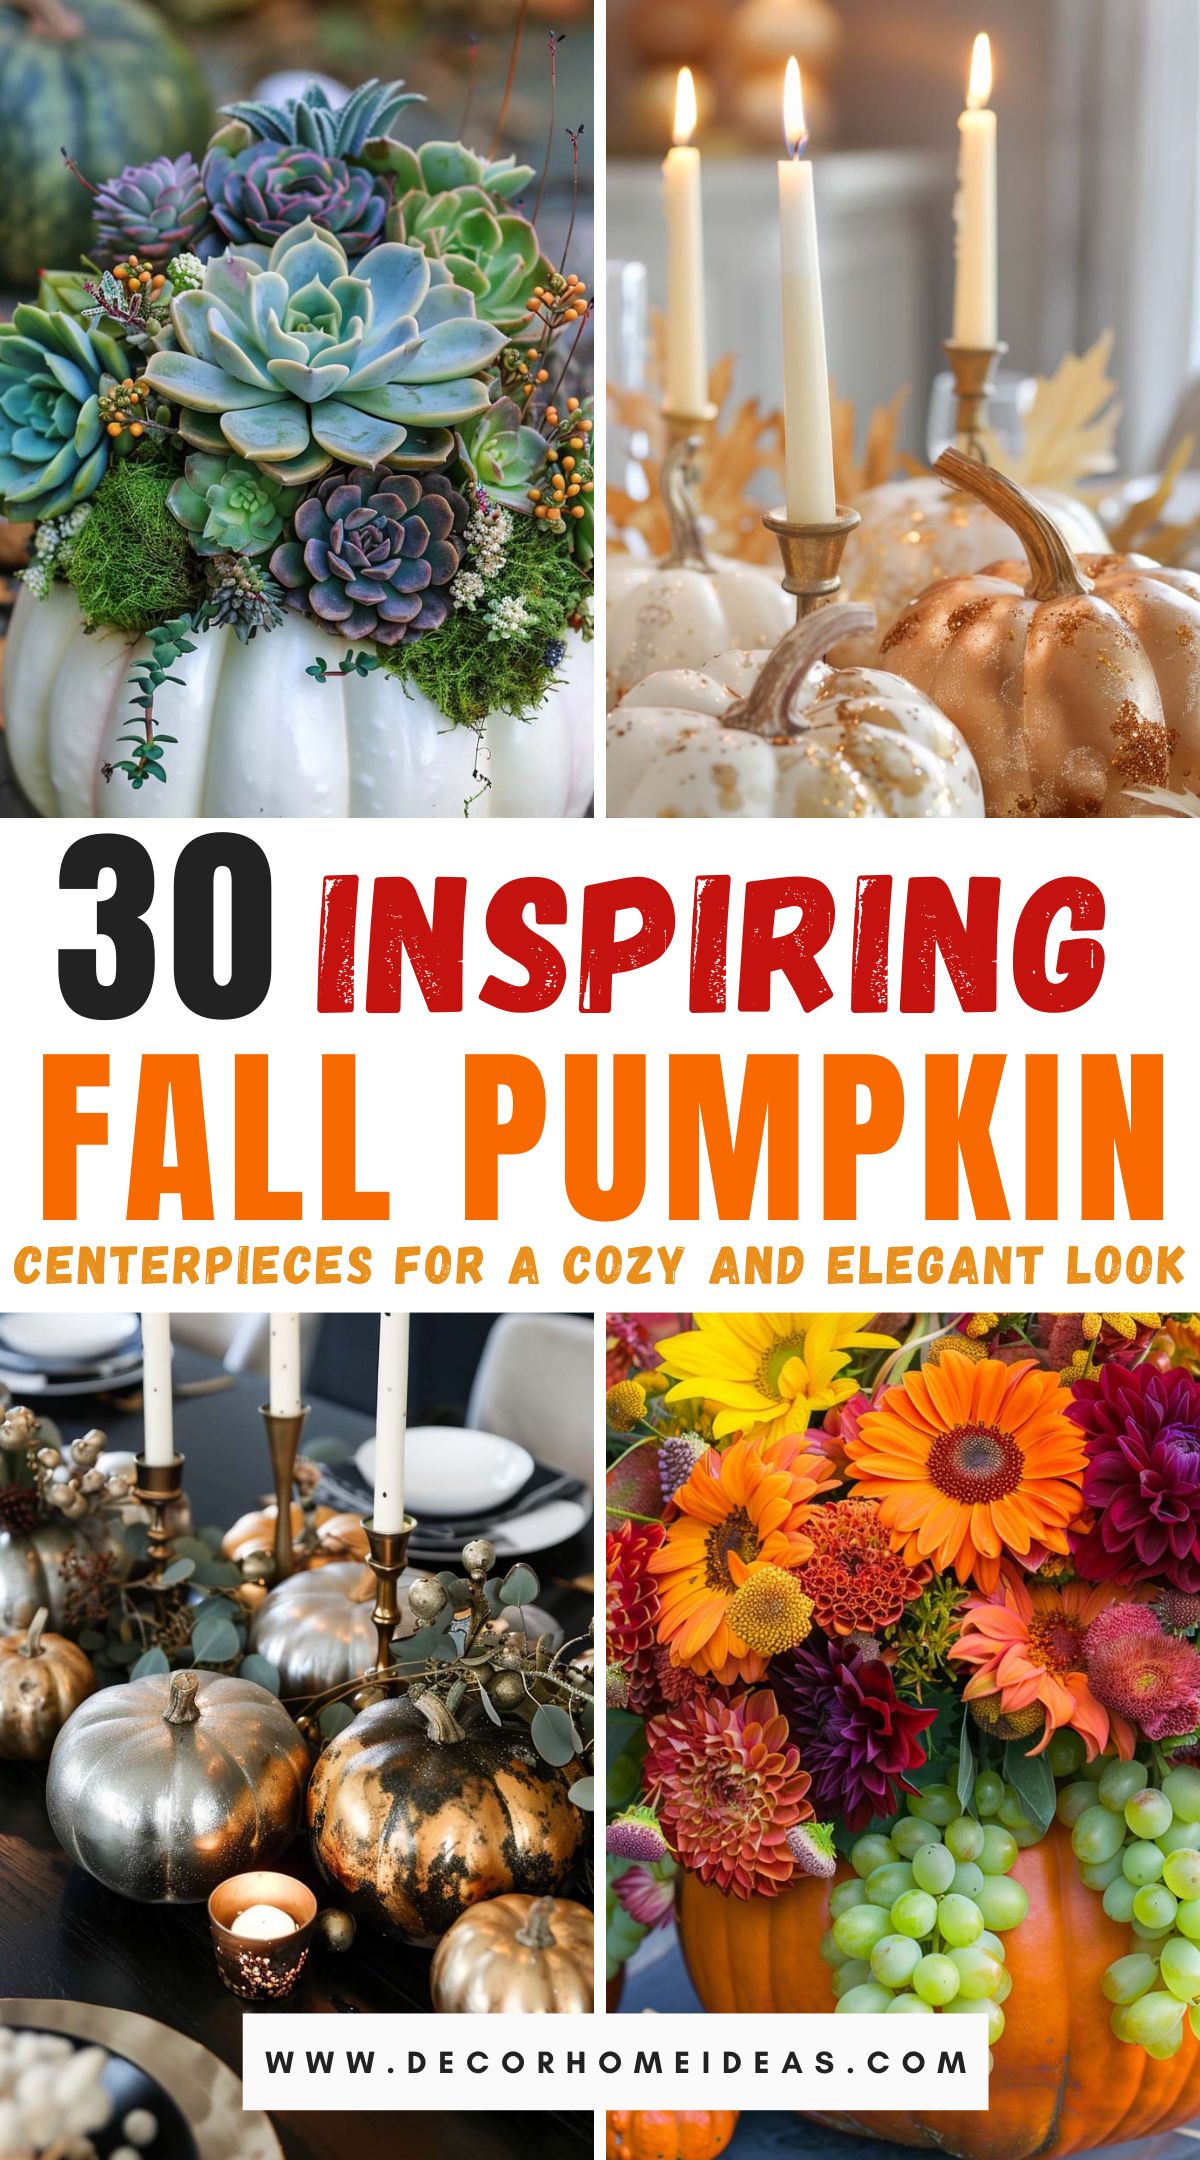 Create a warm and sophisticated autumn atmosphere with these 30 inspiring fall pumpkin centerpieces. From rustic arrangements with natural elements like foliage and pinecones to chic designs featuring metallic paints and candles, discover creative ways to incorporate pumpkins into your decor. These centerpieces will add a cozy and elegant touch to your home, perfect for celebrating the fall season in style.